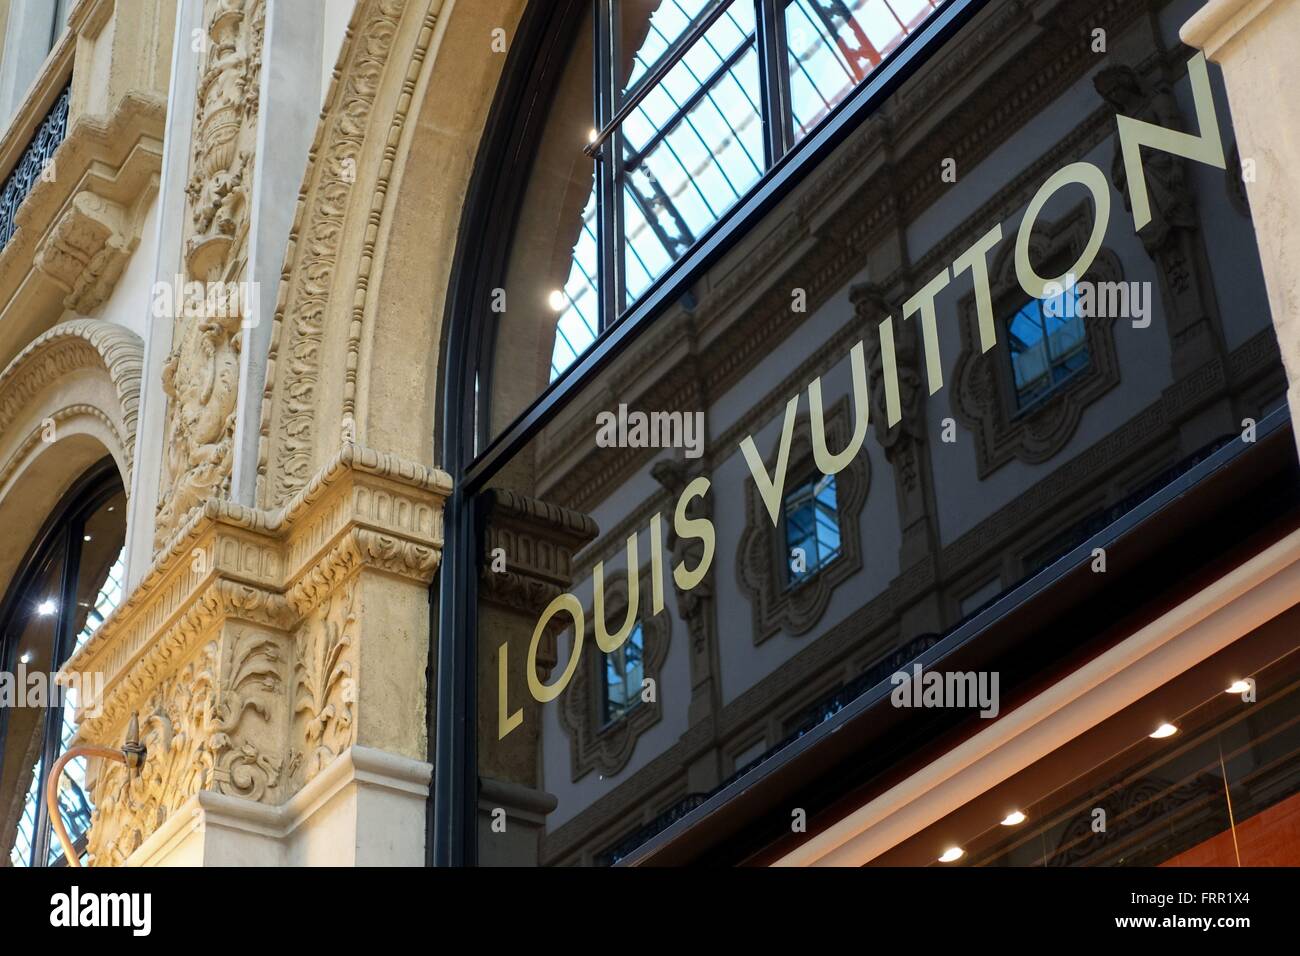 SINGAPORE-JAN 08, 2018: Louis Vuitton LV Outlet In Changi Airport, Singapore.  The Louis Vuitton Company Operates With More Than 460 Stores Worldwide.  Stock Photo, Picture and Royalty Free Image. Image 94332289.